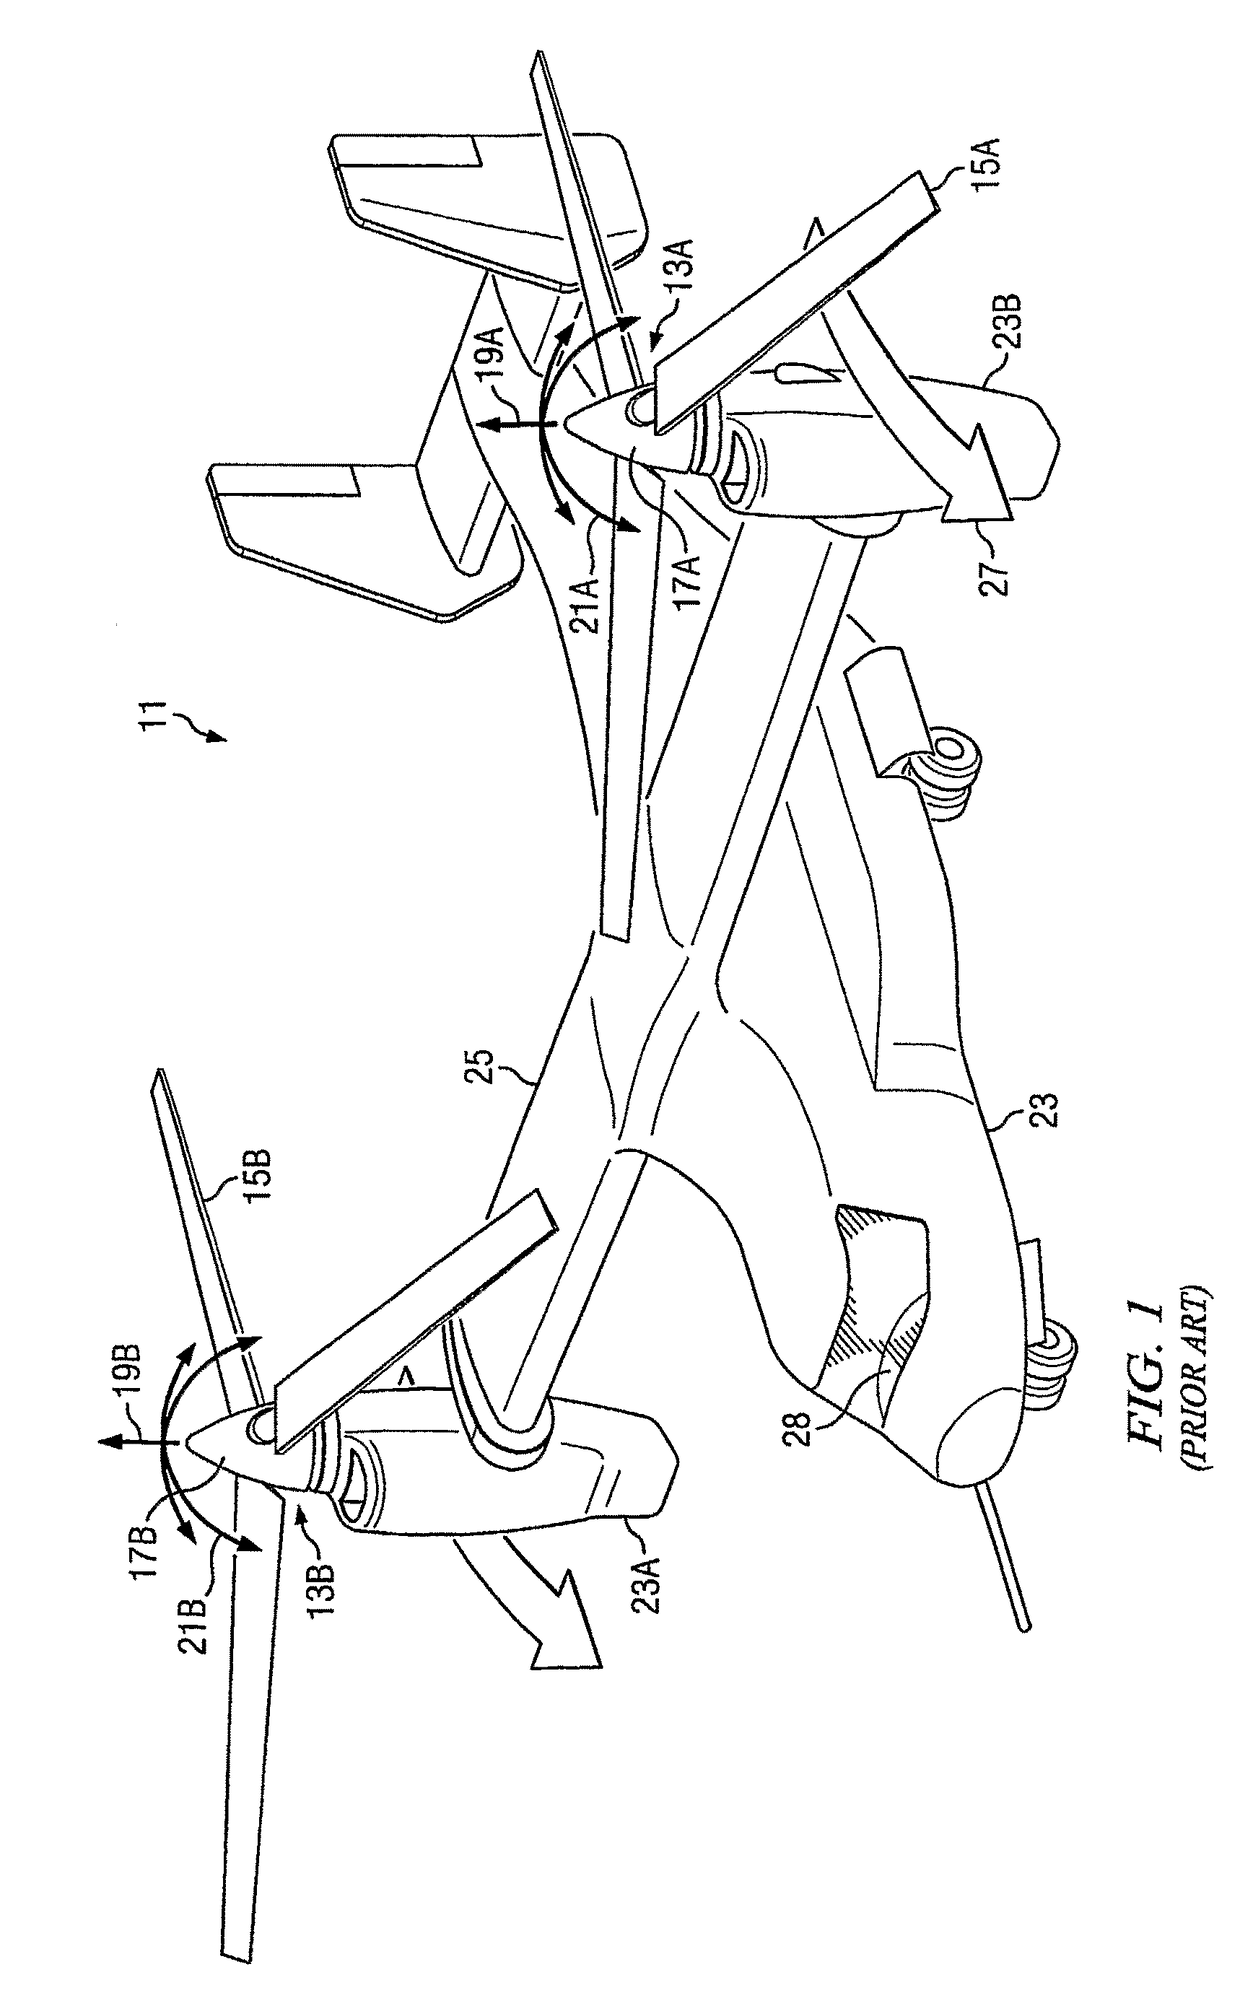 Method and apparatus for flight control of tiltrotor aircraft